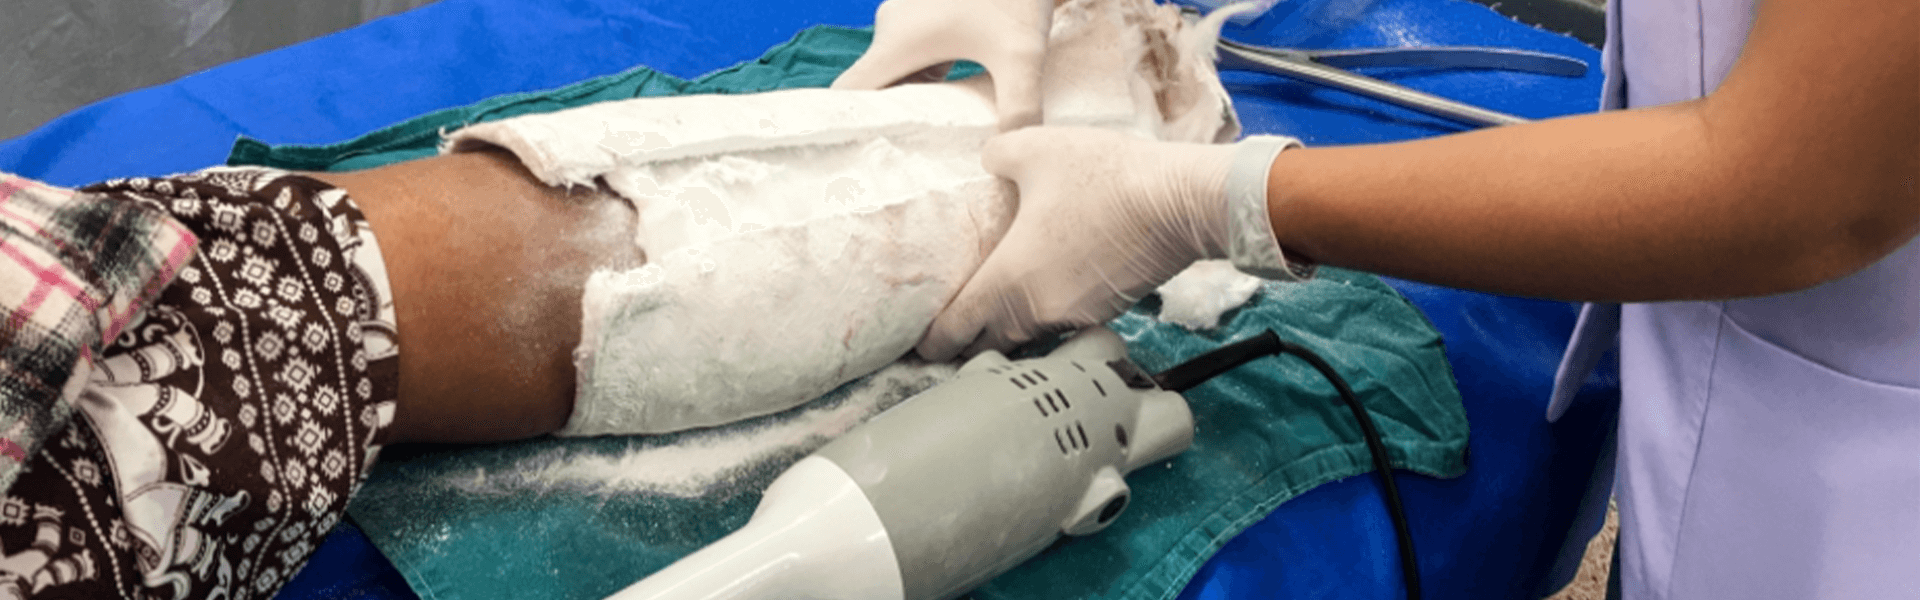 Cast Removal | Manipal Hospitals India